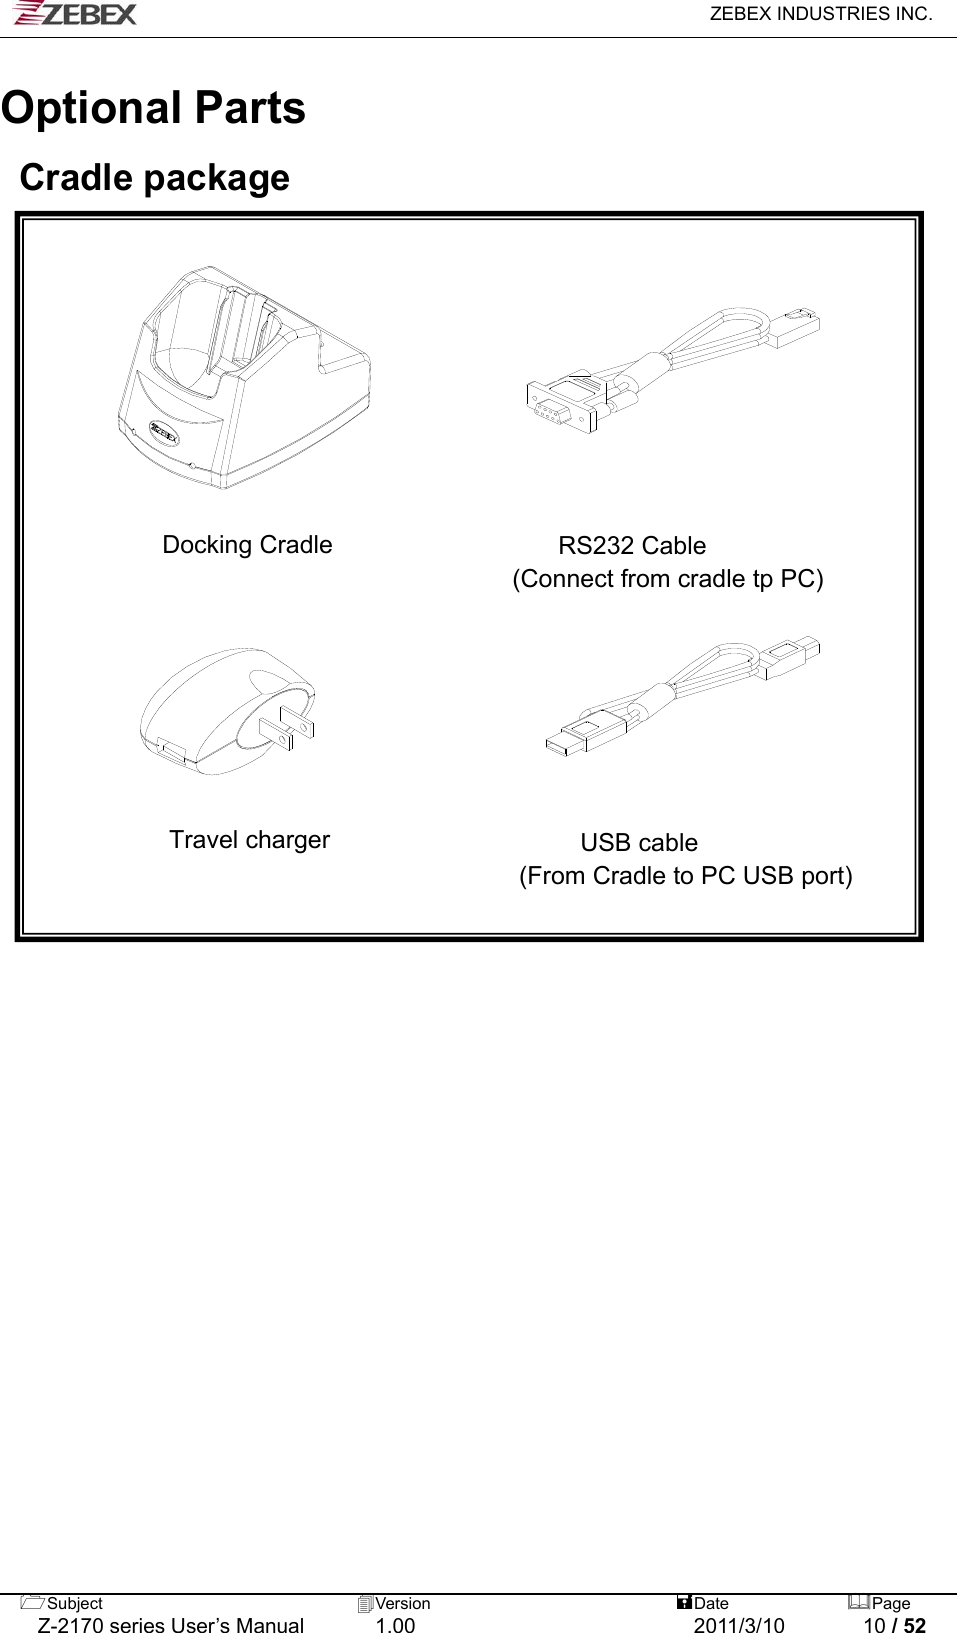   ZEBEX INDUSTRIES INC.  Subject  Version   DatePage   Z-2170 series User’s Manual  1.00  2011/3/10  10 / 52                                         Optional Parts  Cradle package           Docking Cradle                  RS232 Cable (Connect from cradle tp PC)                                     Travel charger                    USB cable  (From Cradle to PC USB port)       